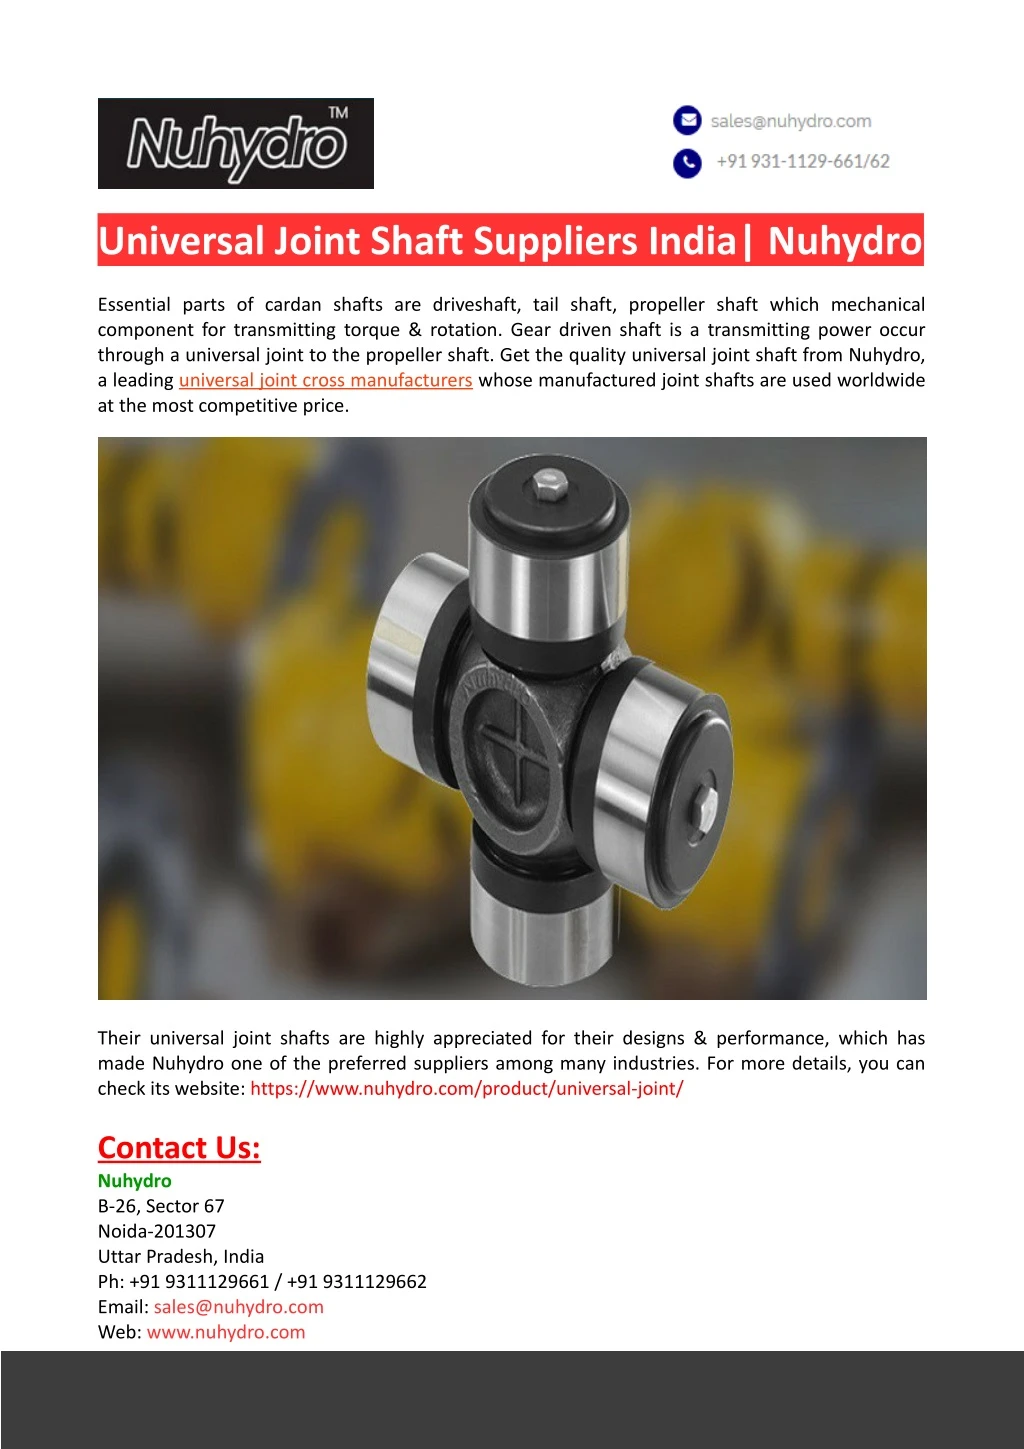 universal joint shaft suppliers india nuhydro n.